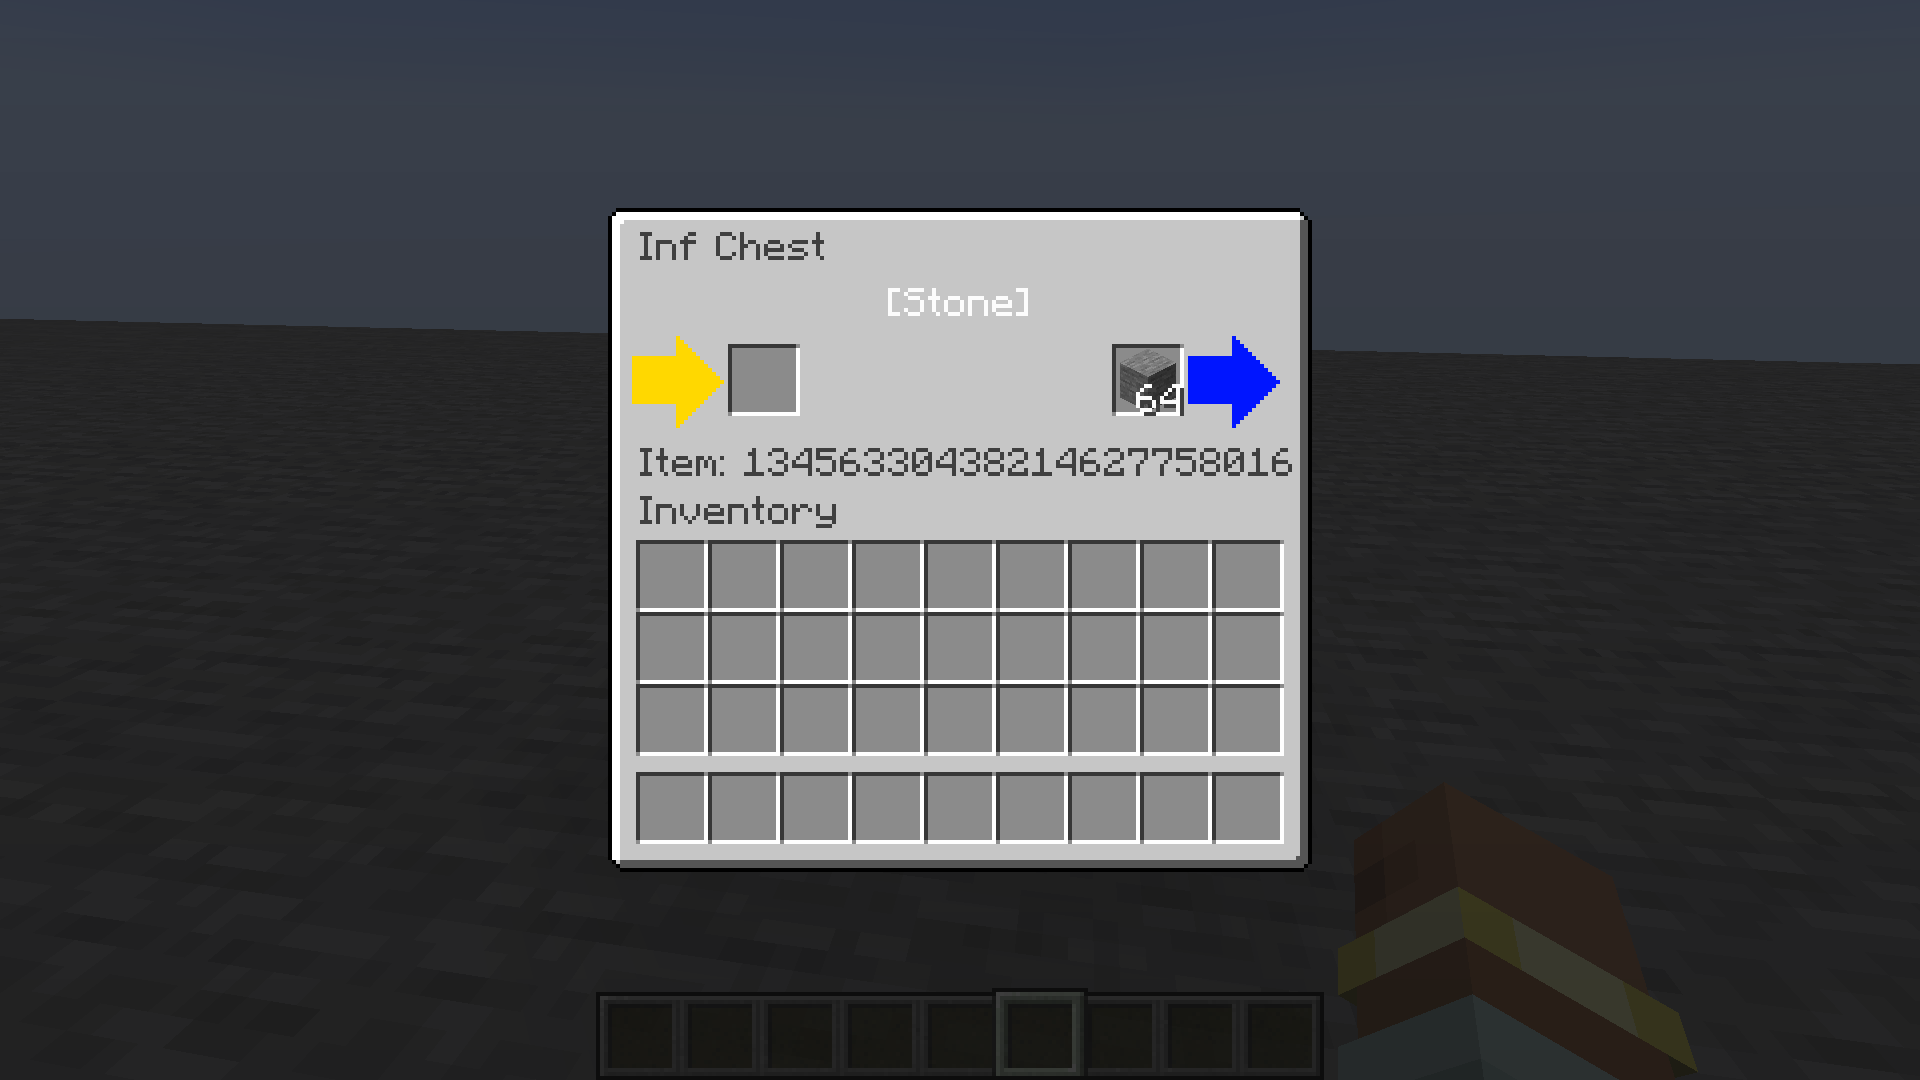 This chest contains over 10^22 of Stone.